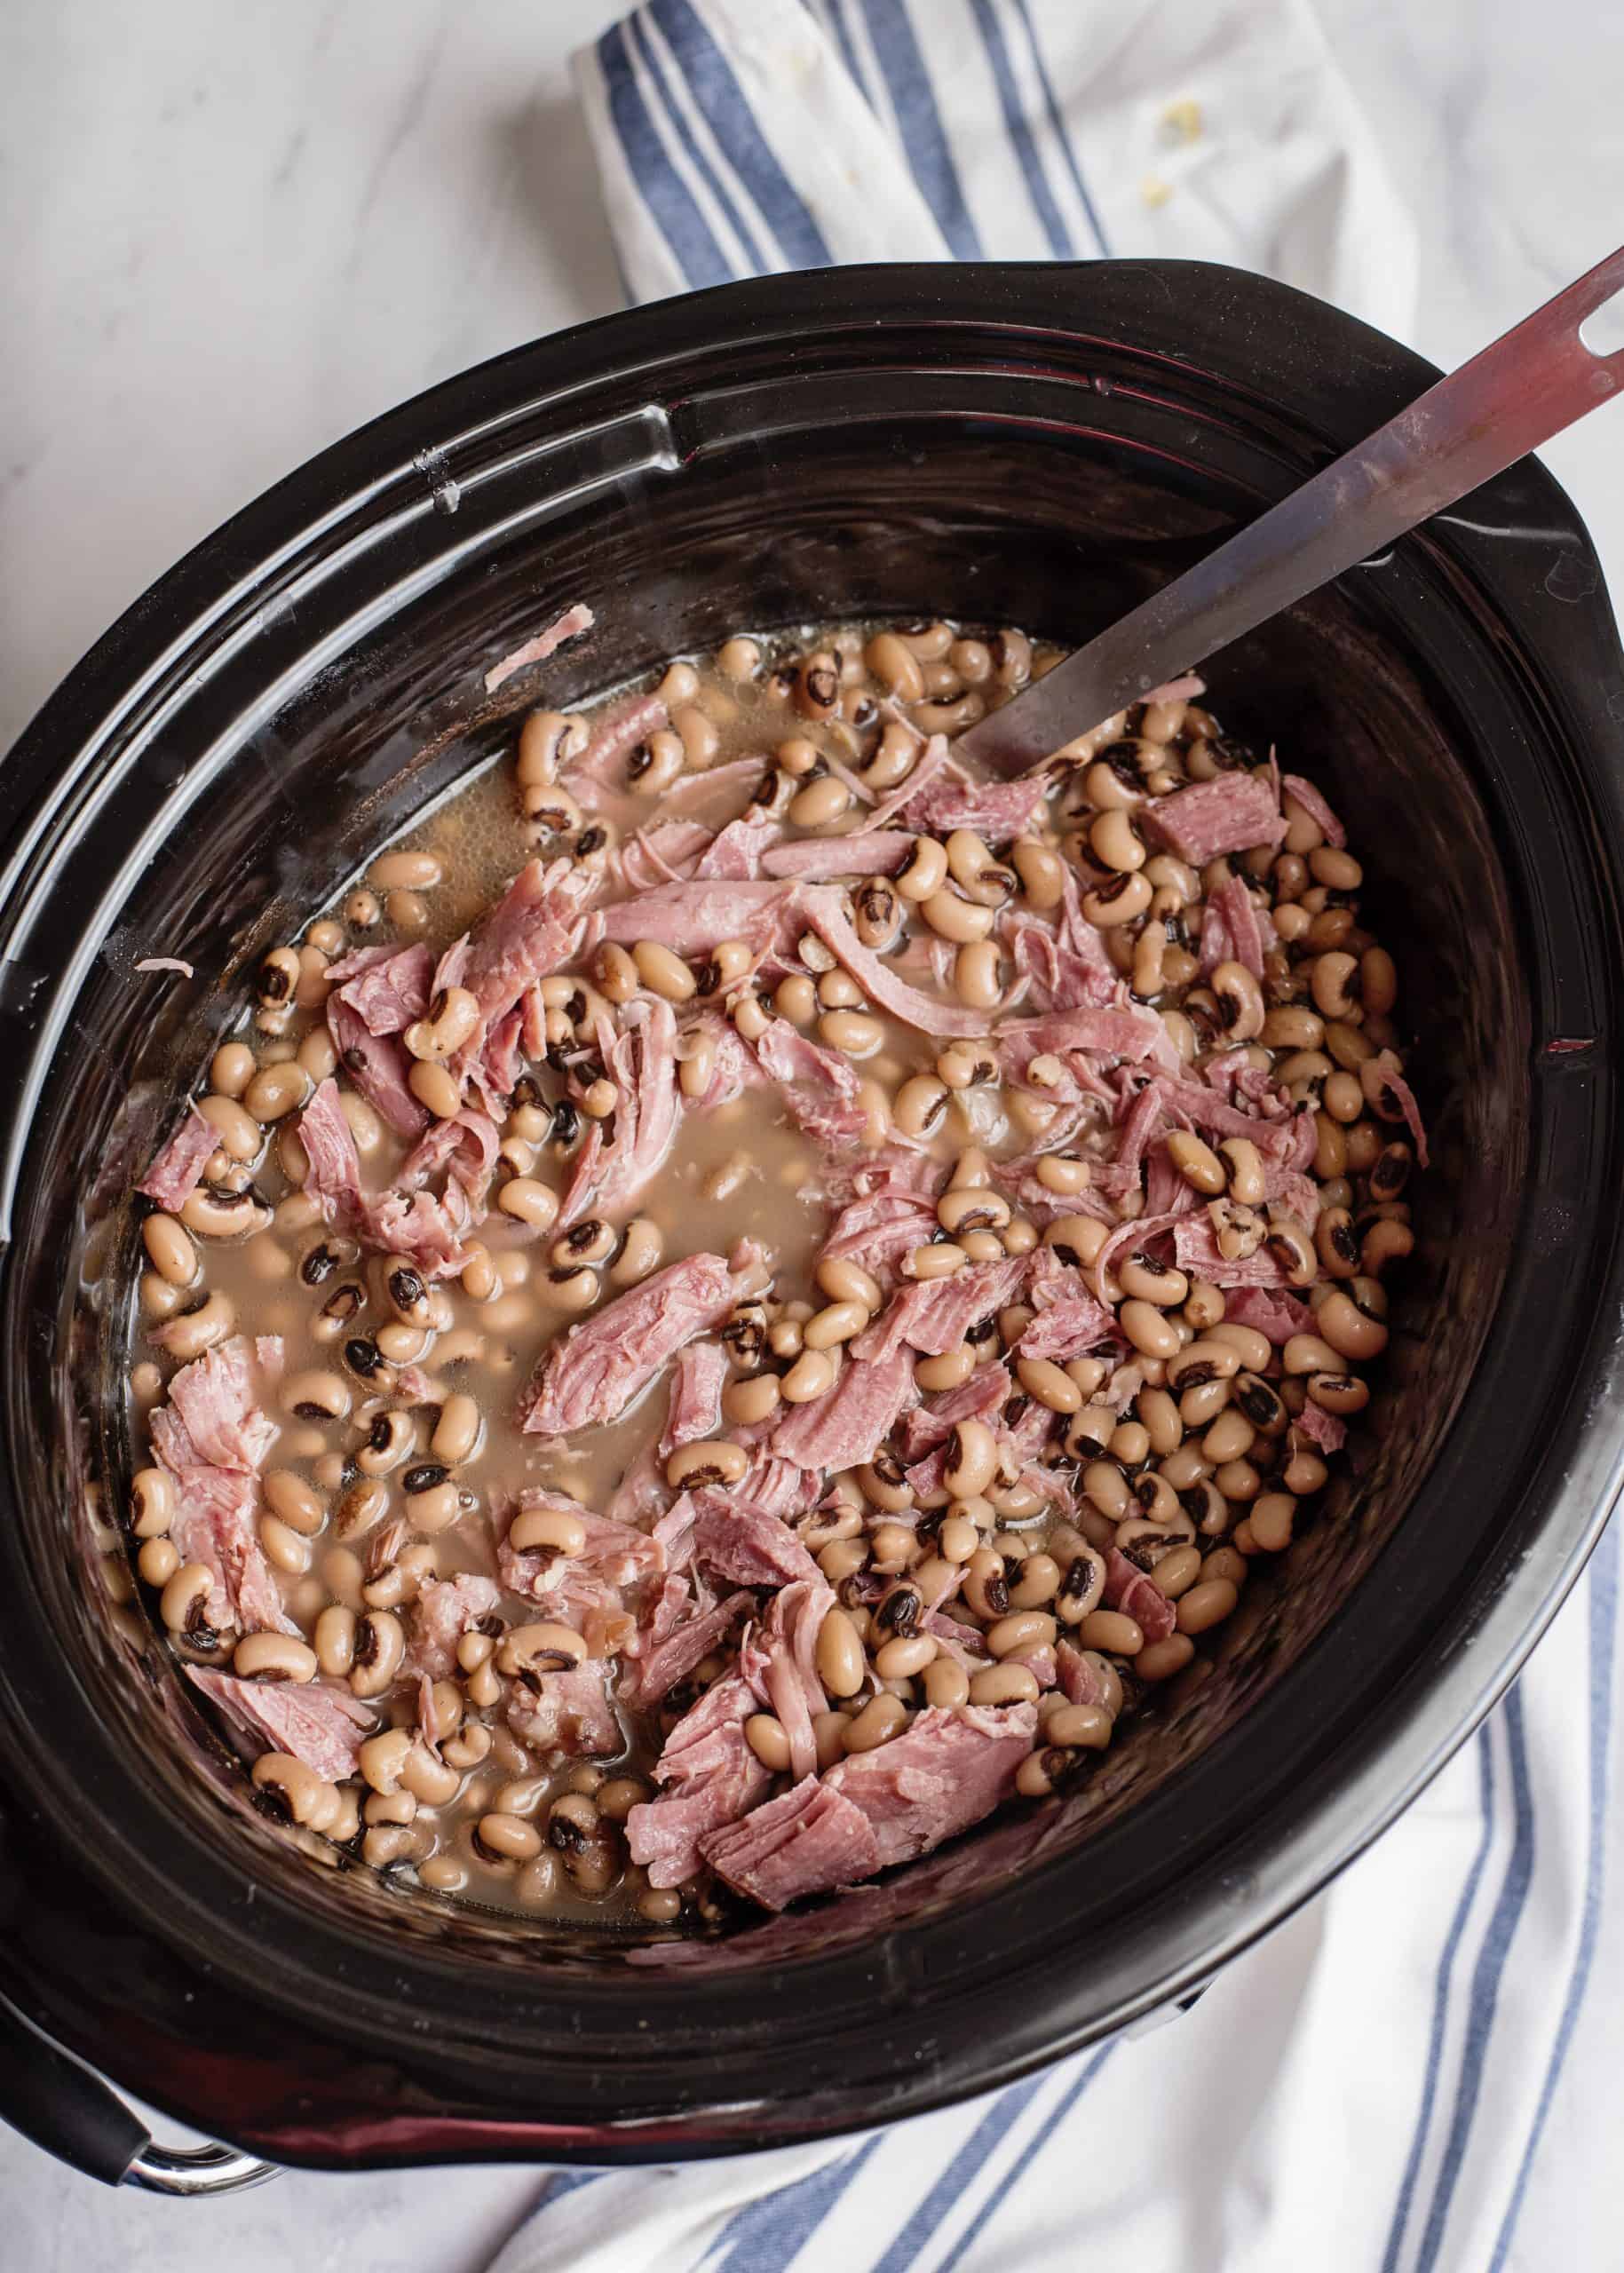 Shred turkey and place it back in the slow cooker.